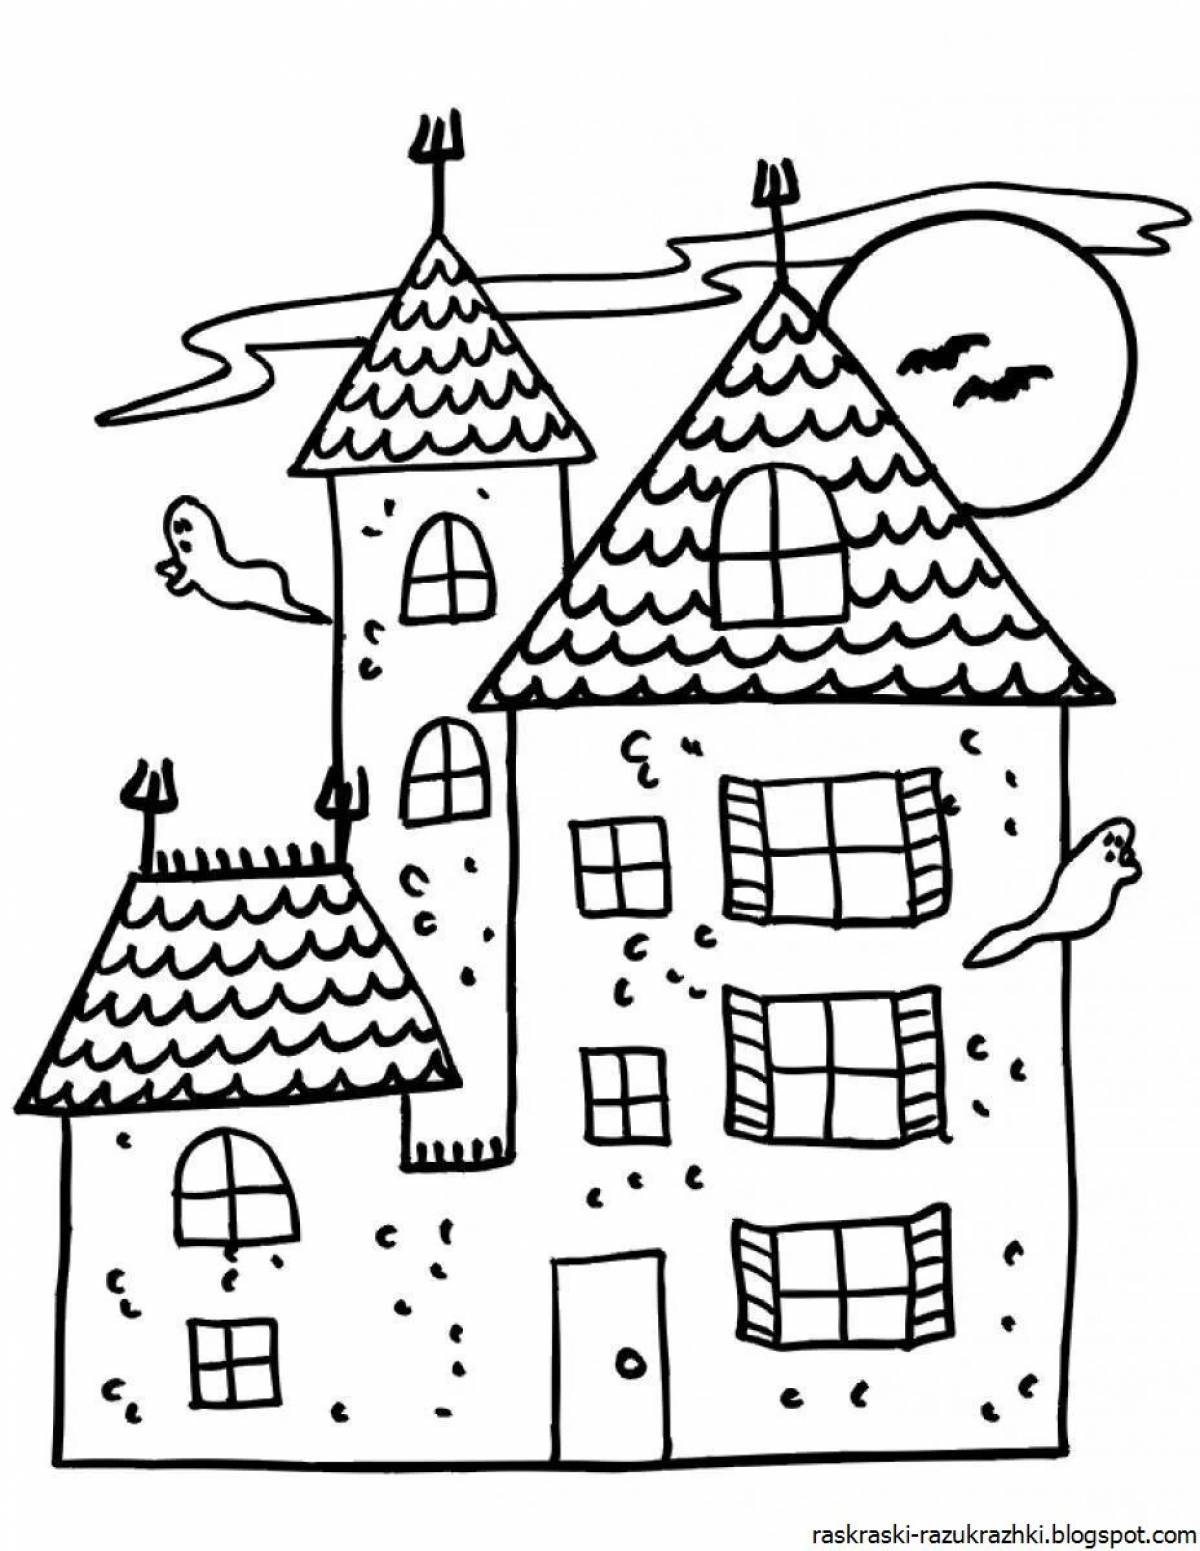 House for children drawing #4